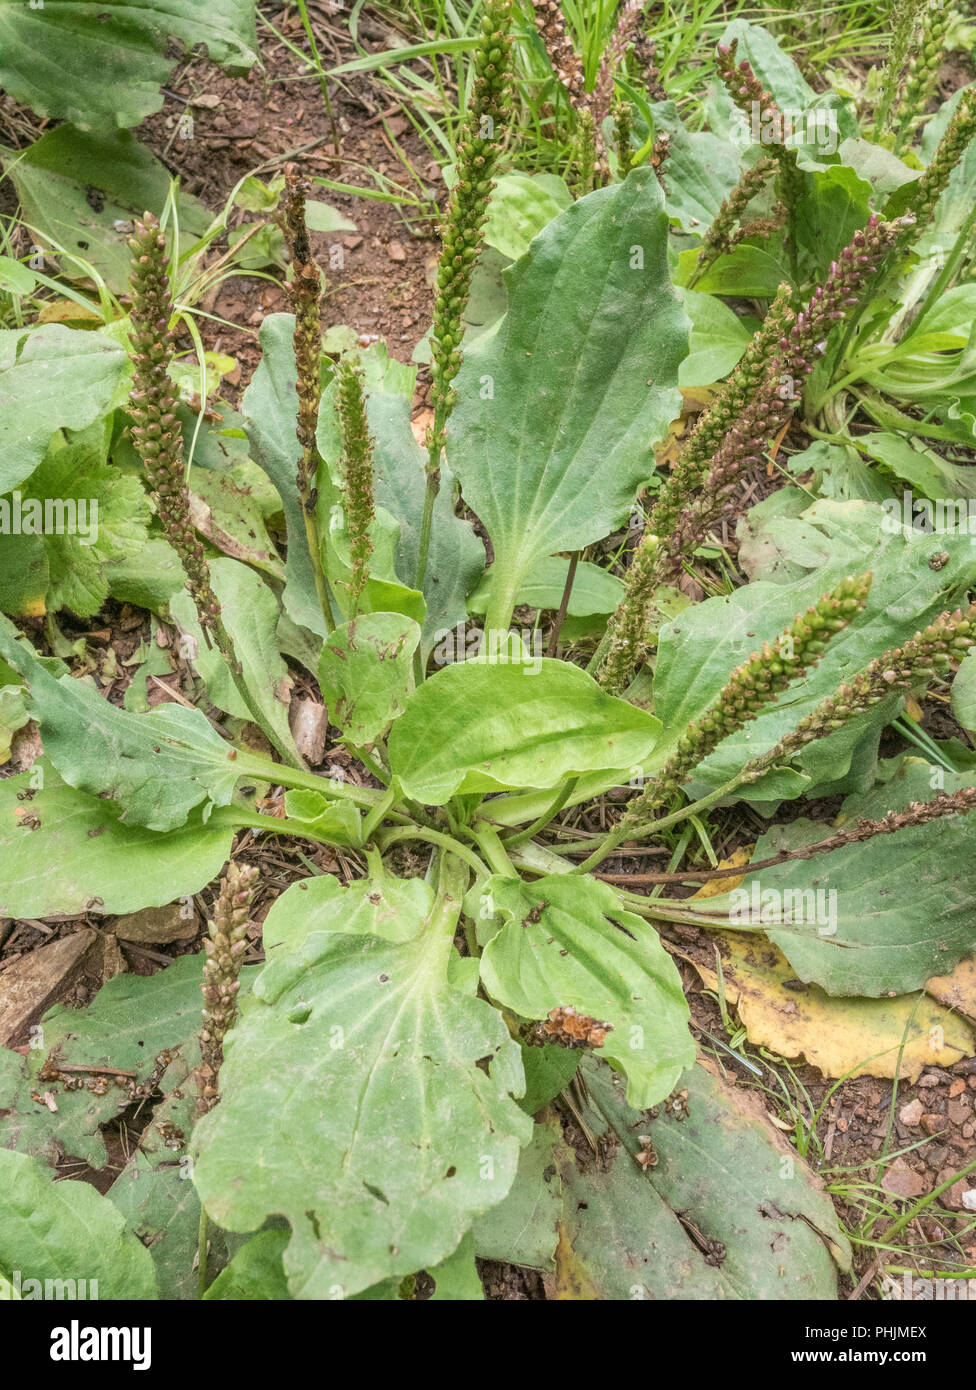 Leaves / foliage of Greater Plantain (Plantago major) on a country footpath. Sometimes foraged and cooked as a survival food. Stock Photo